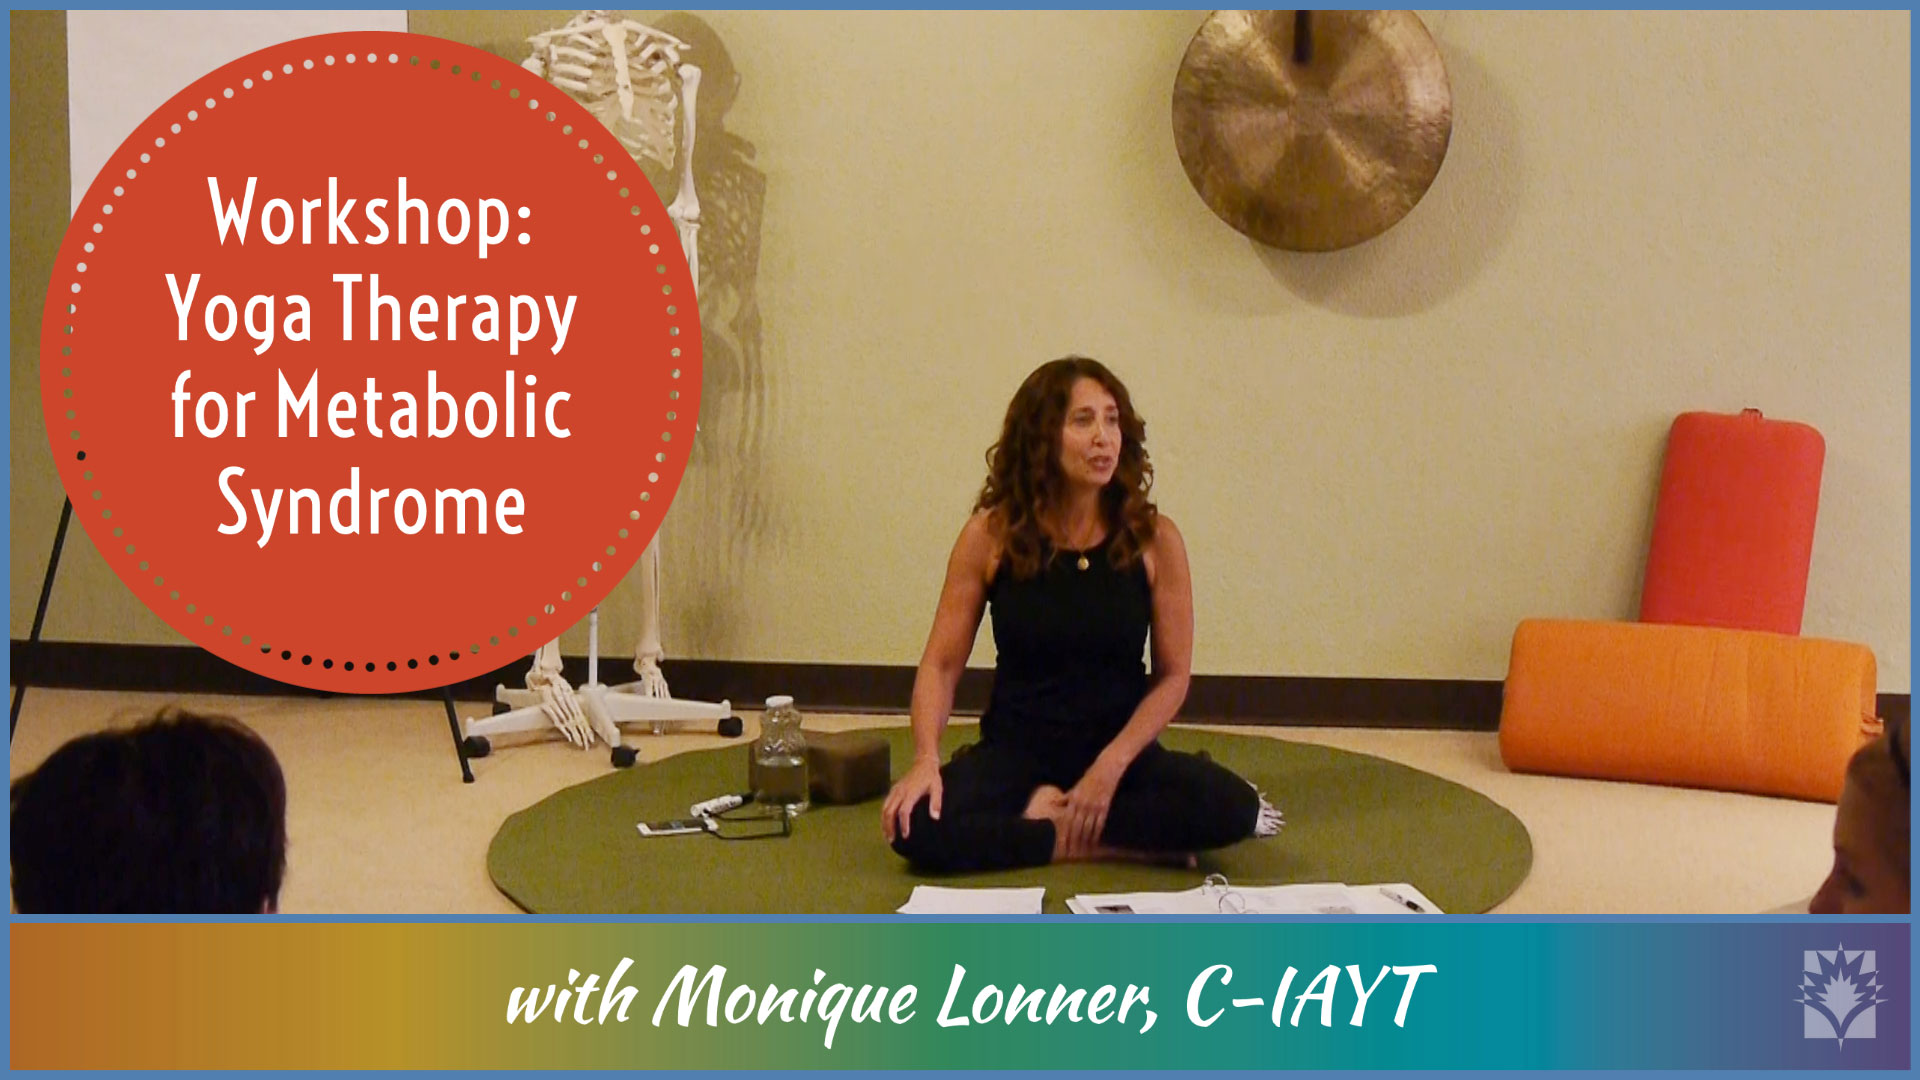 Workshop: Yoga Therapy for Metabolic Syndrome with Monique Lonner